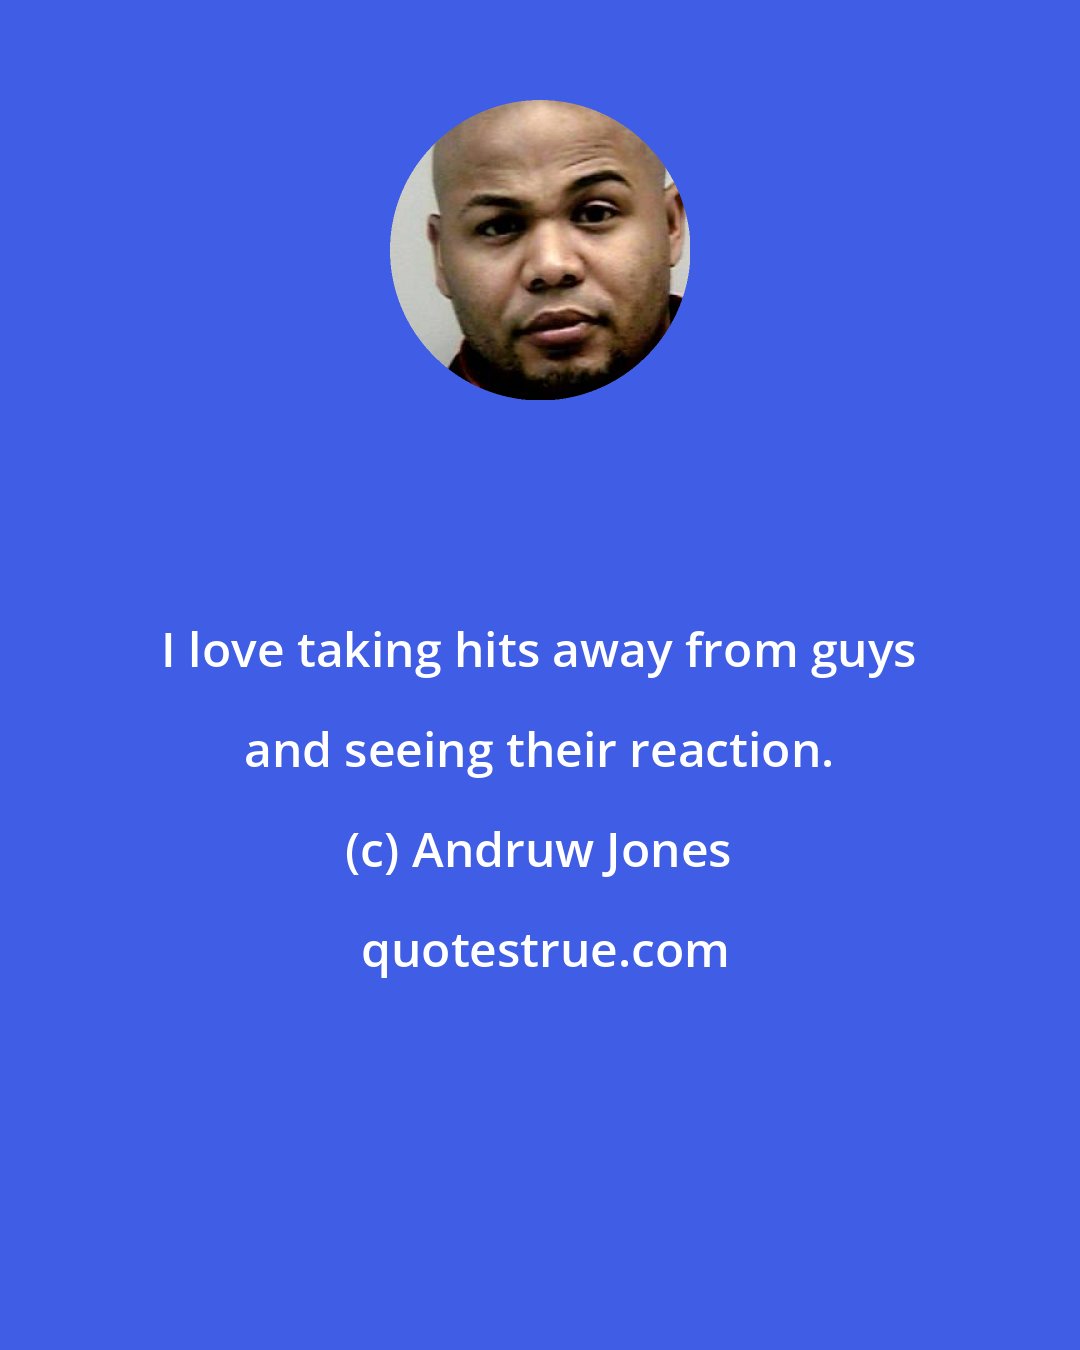 Andruw Jones: I love taking hits away from guys and seeing their reaction.